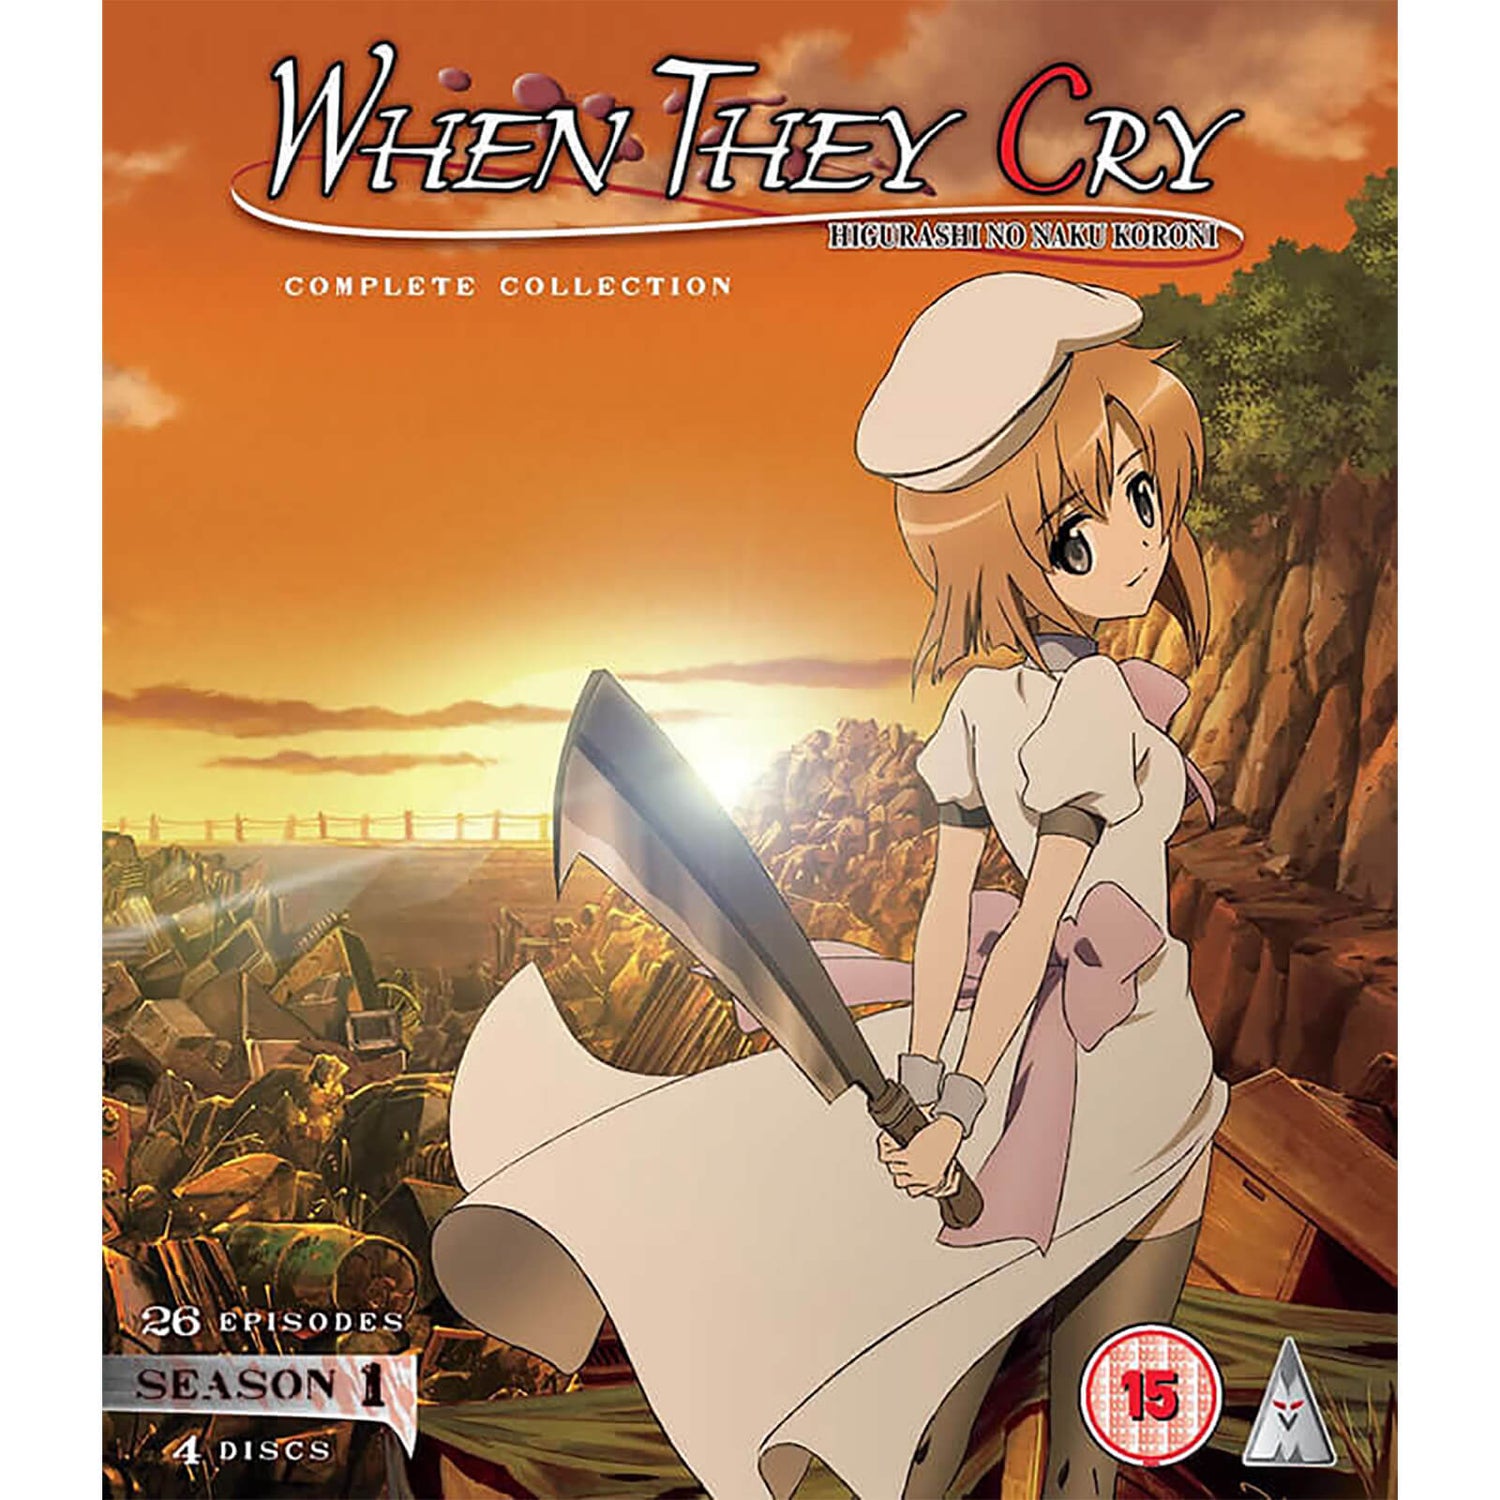 When They Cry S1 Collection BLU-RAY